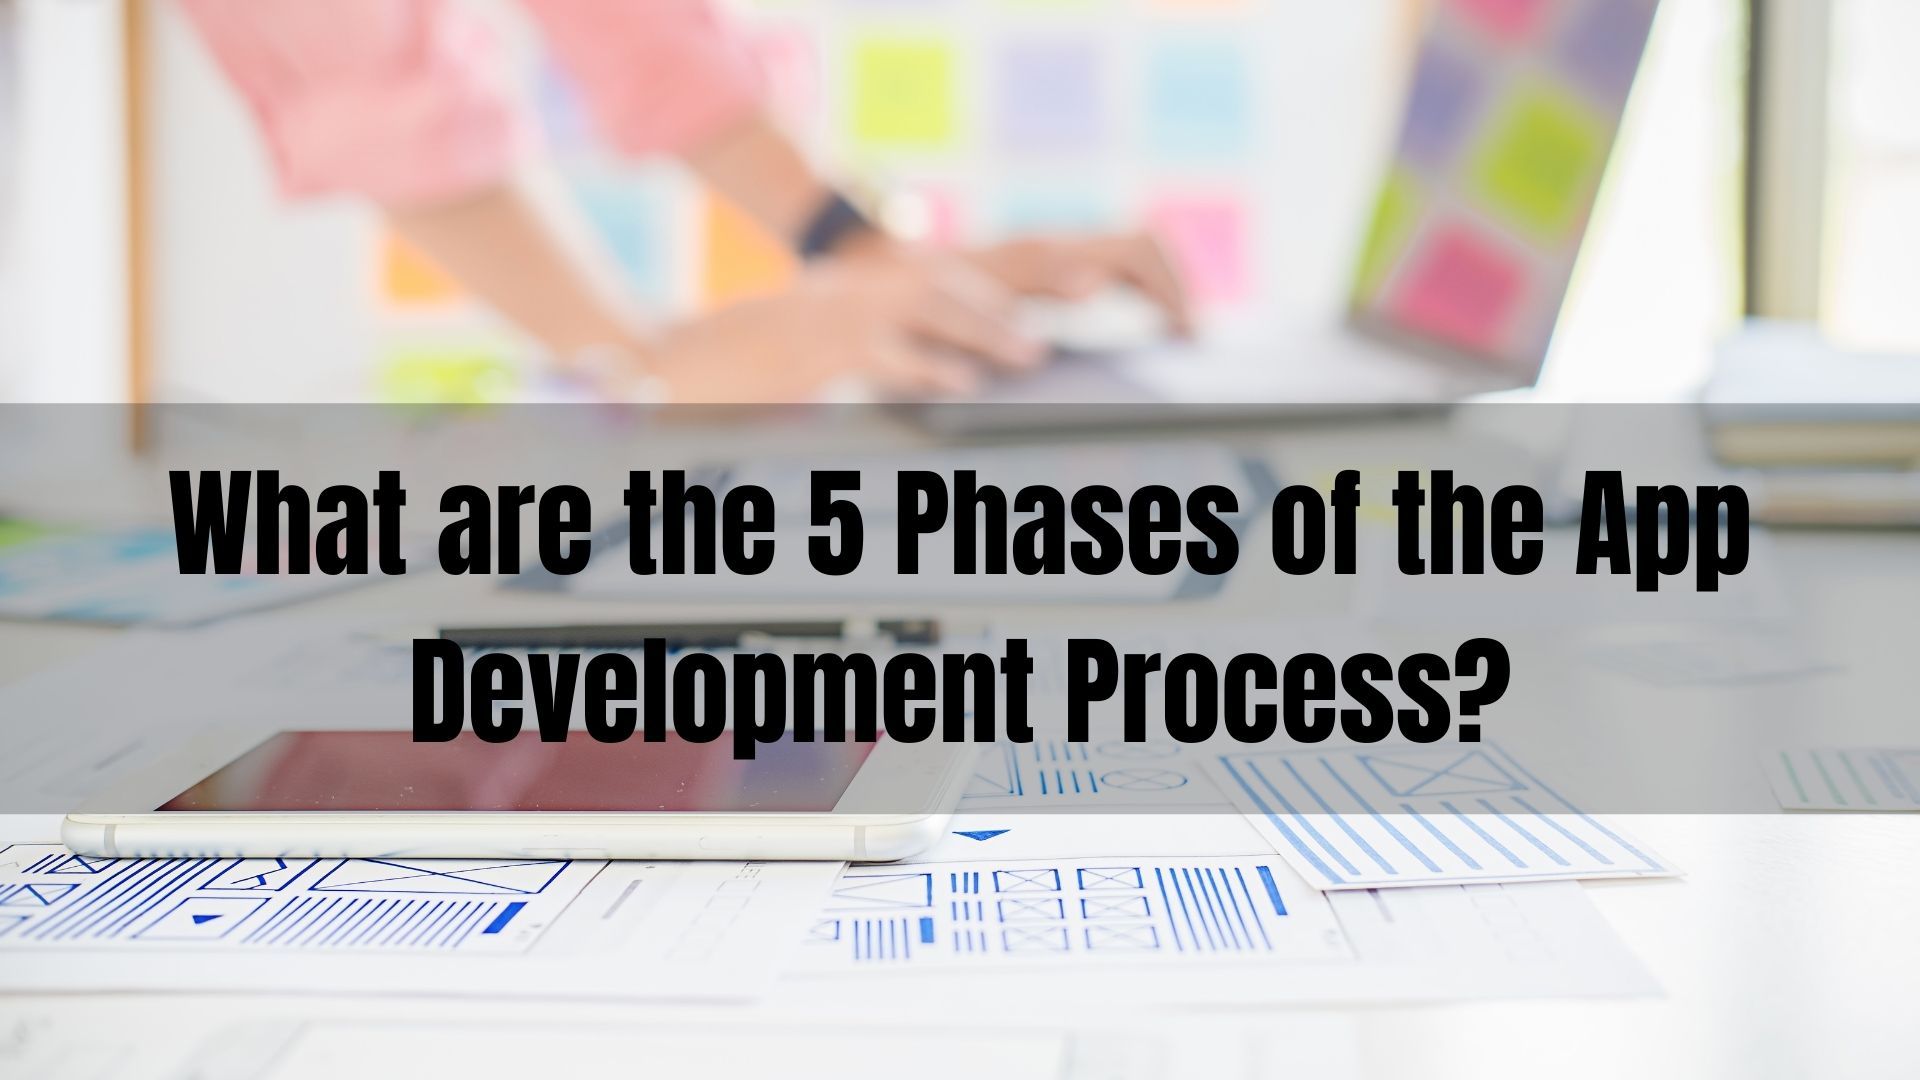 What are the 5 Phases of the App Development Process?